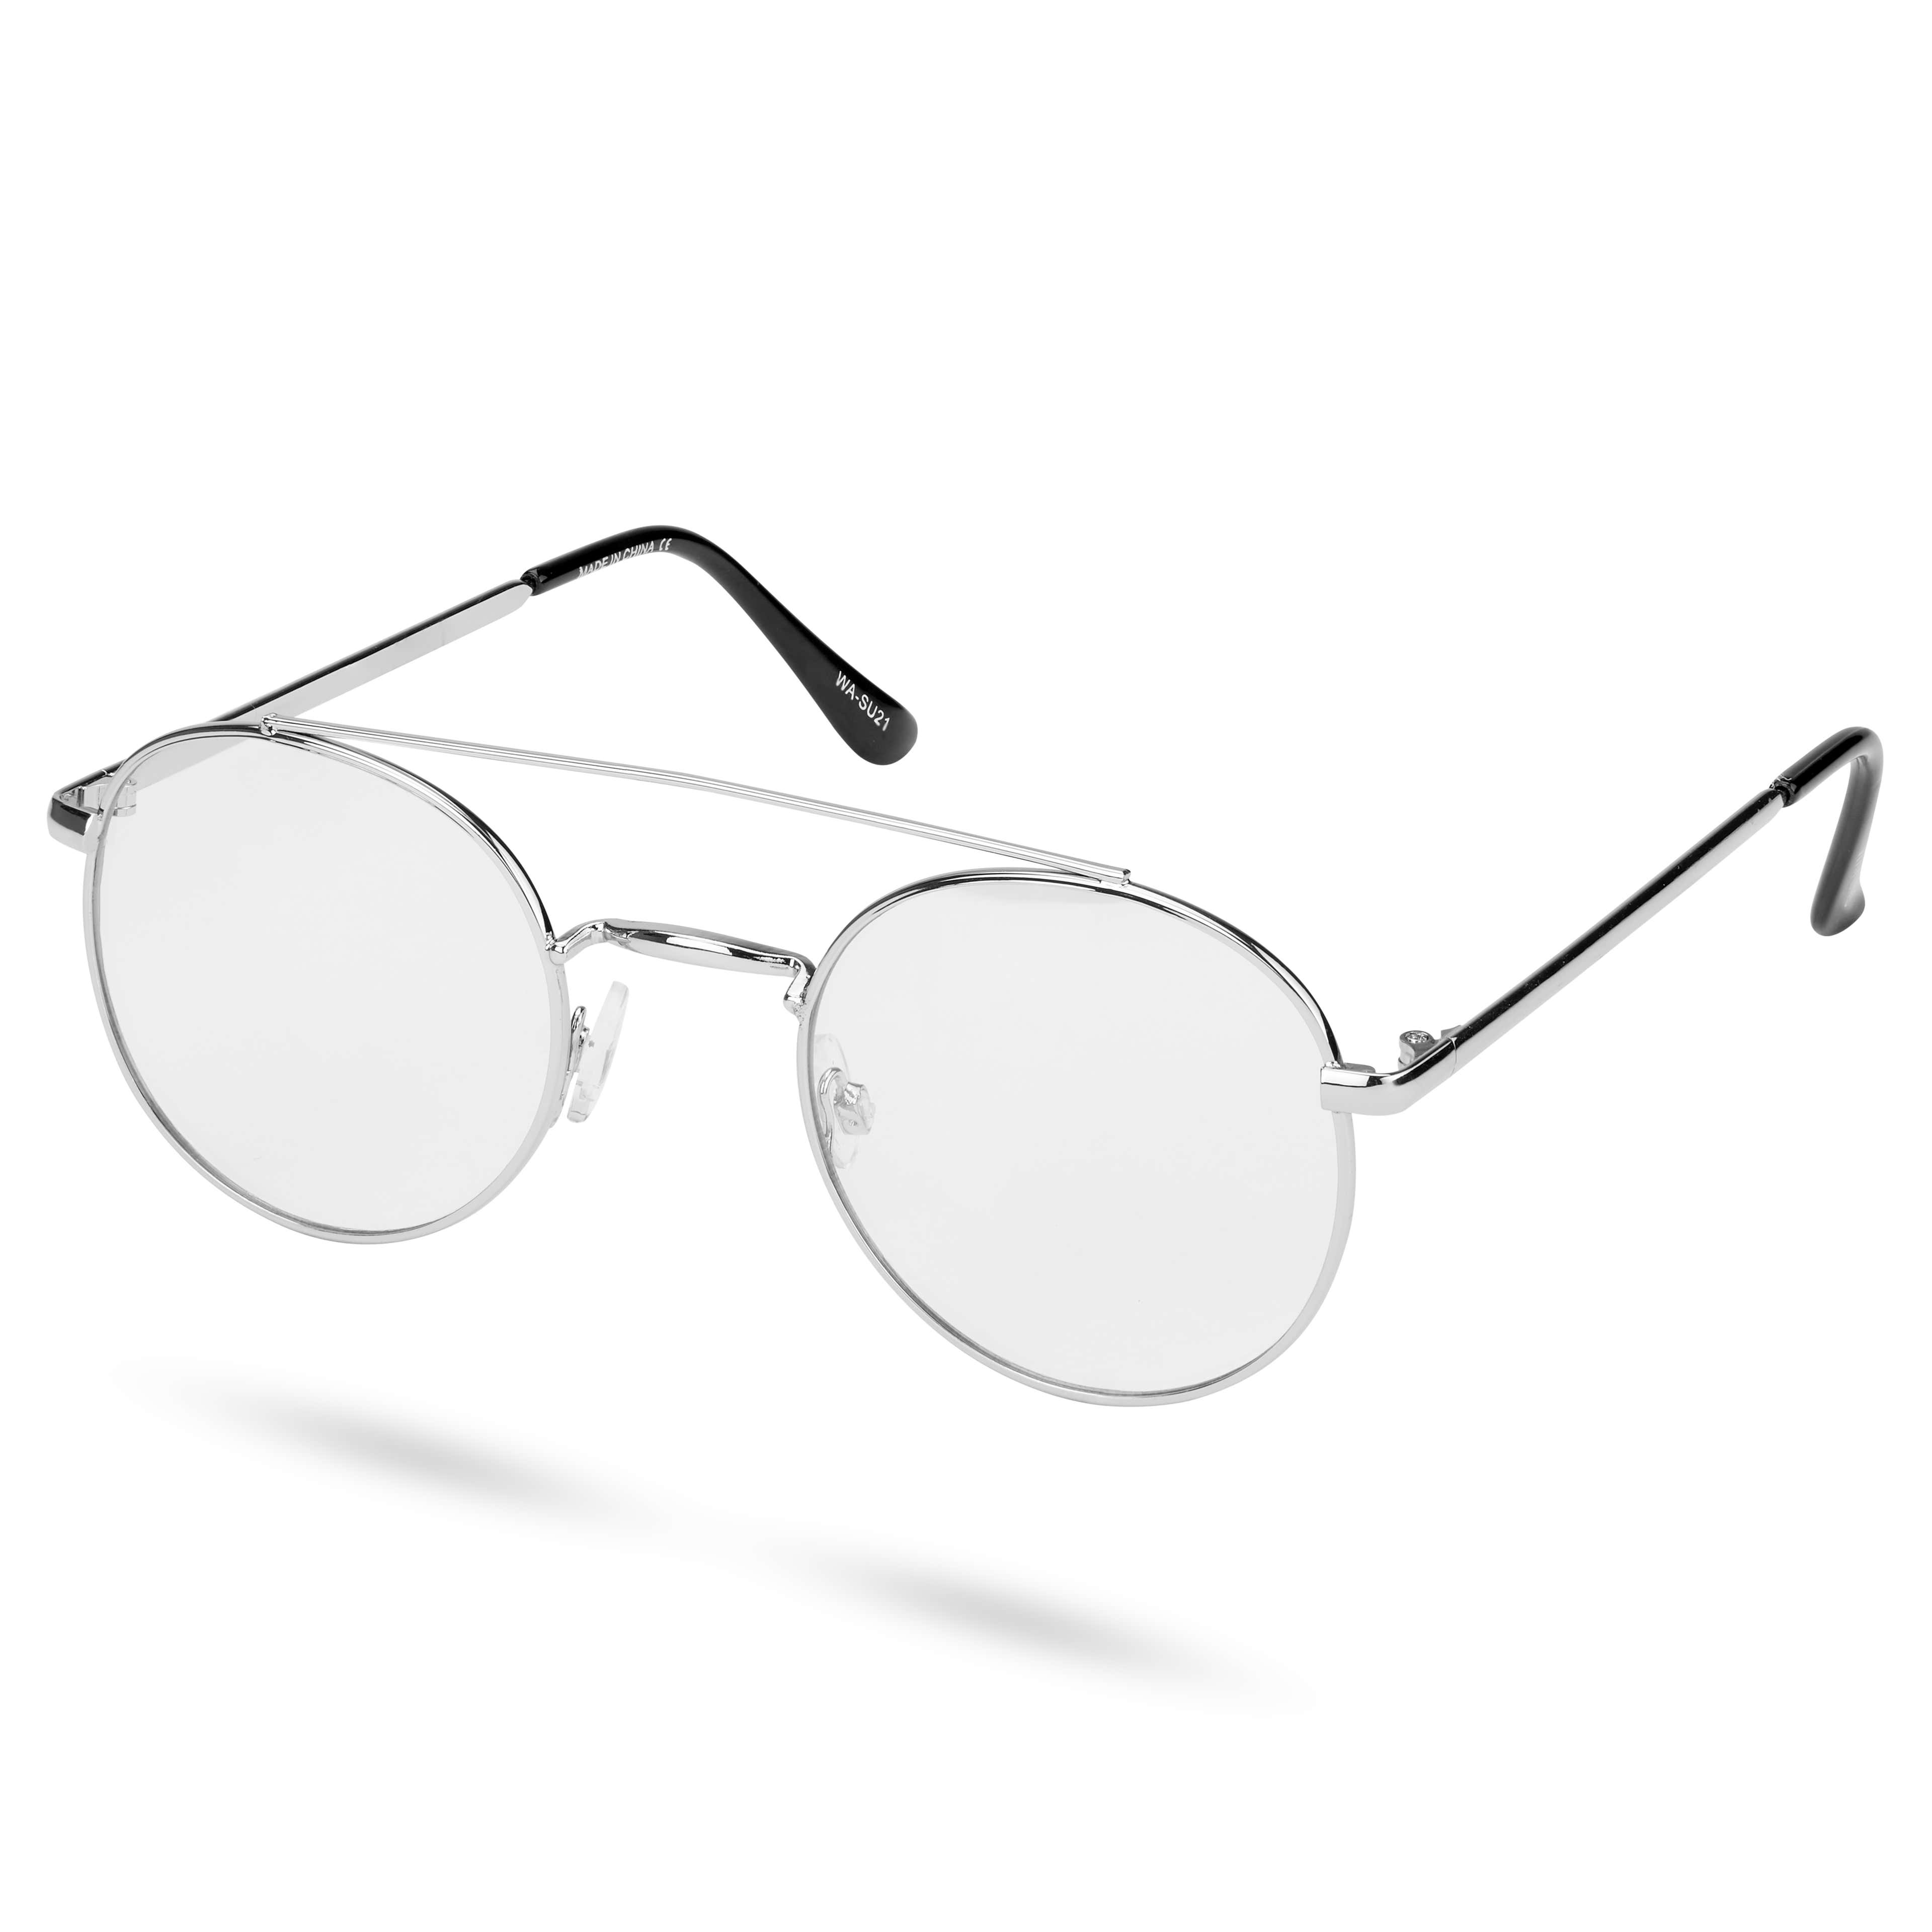 Ambit Silver-Tone Round Aviator Clear Lens Glasses 